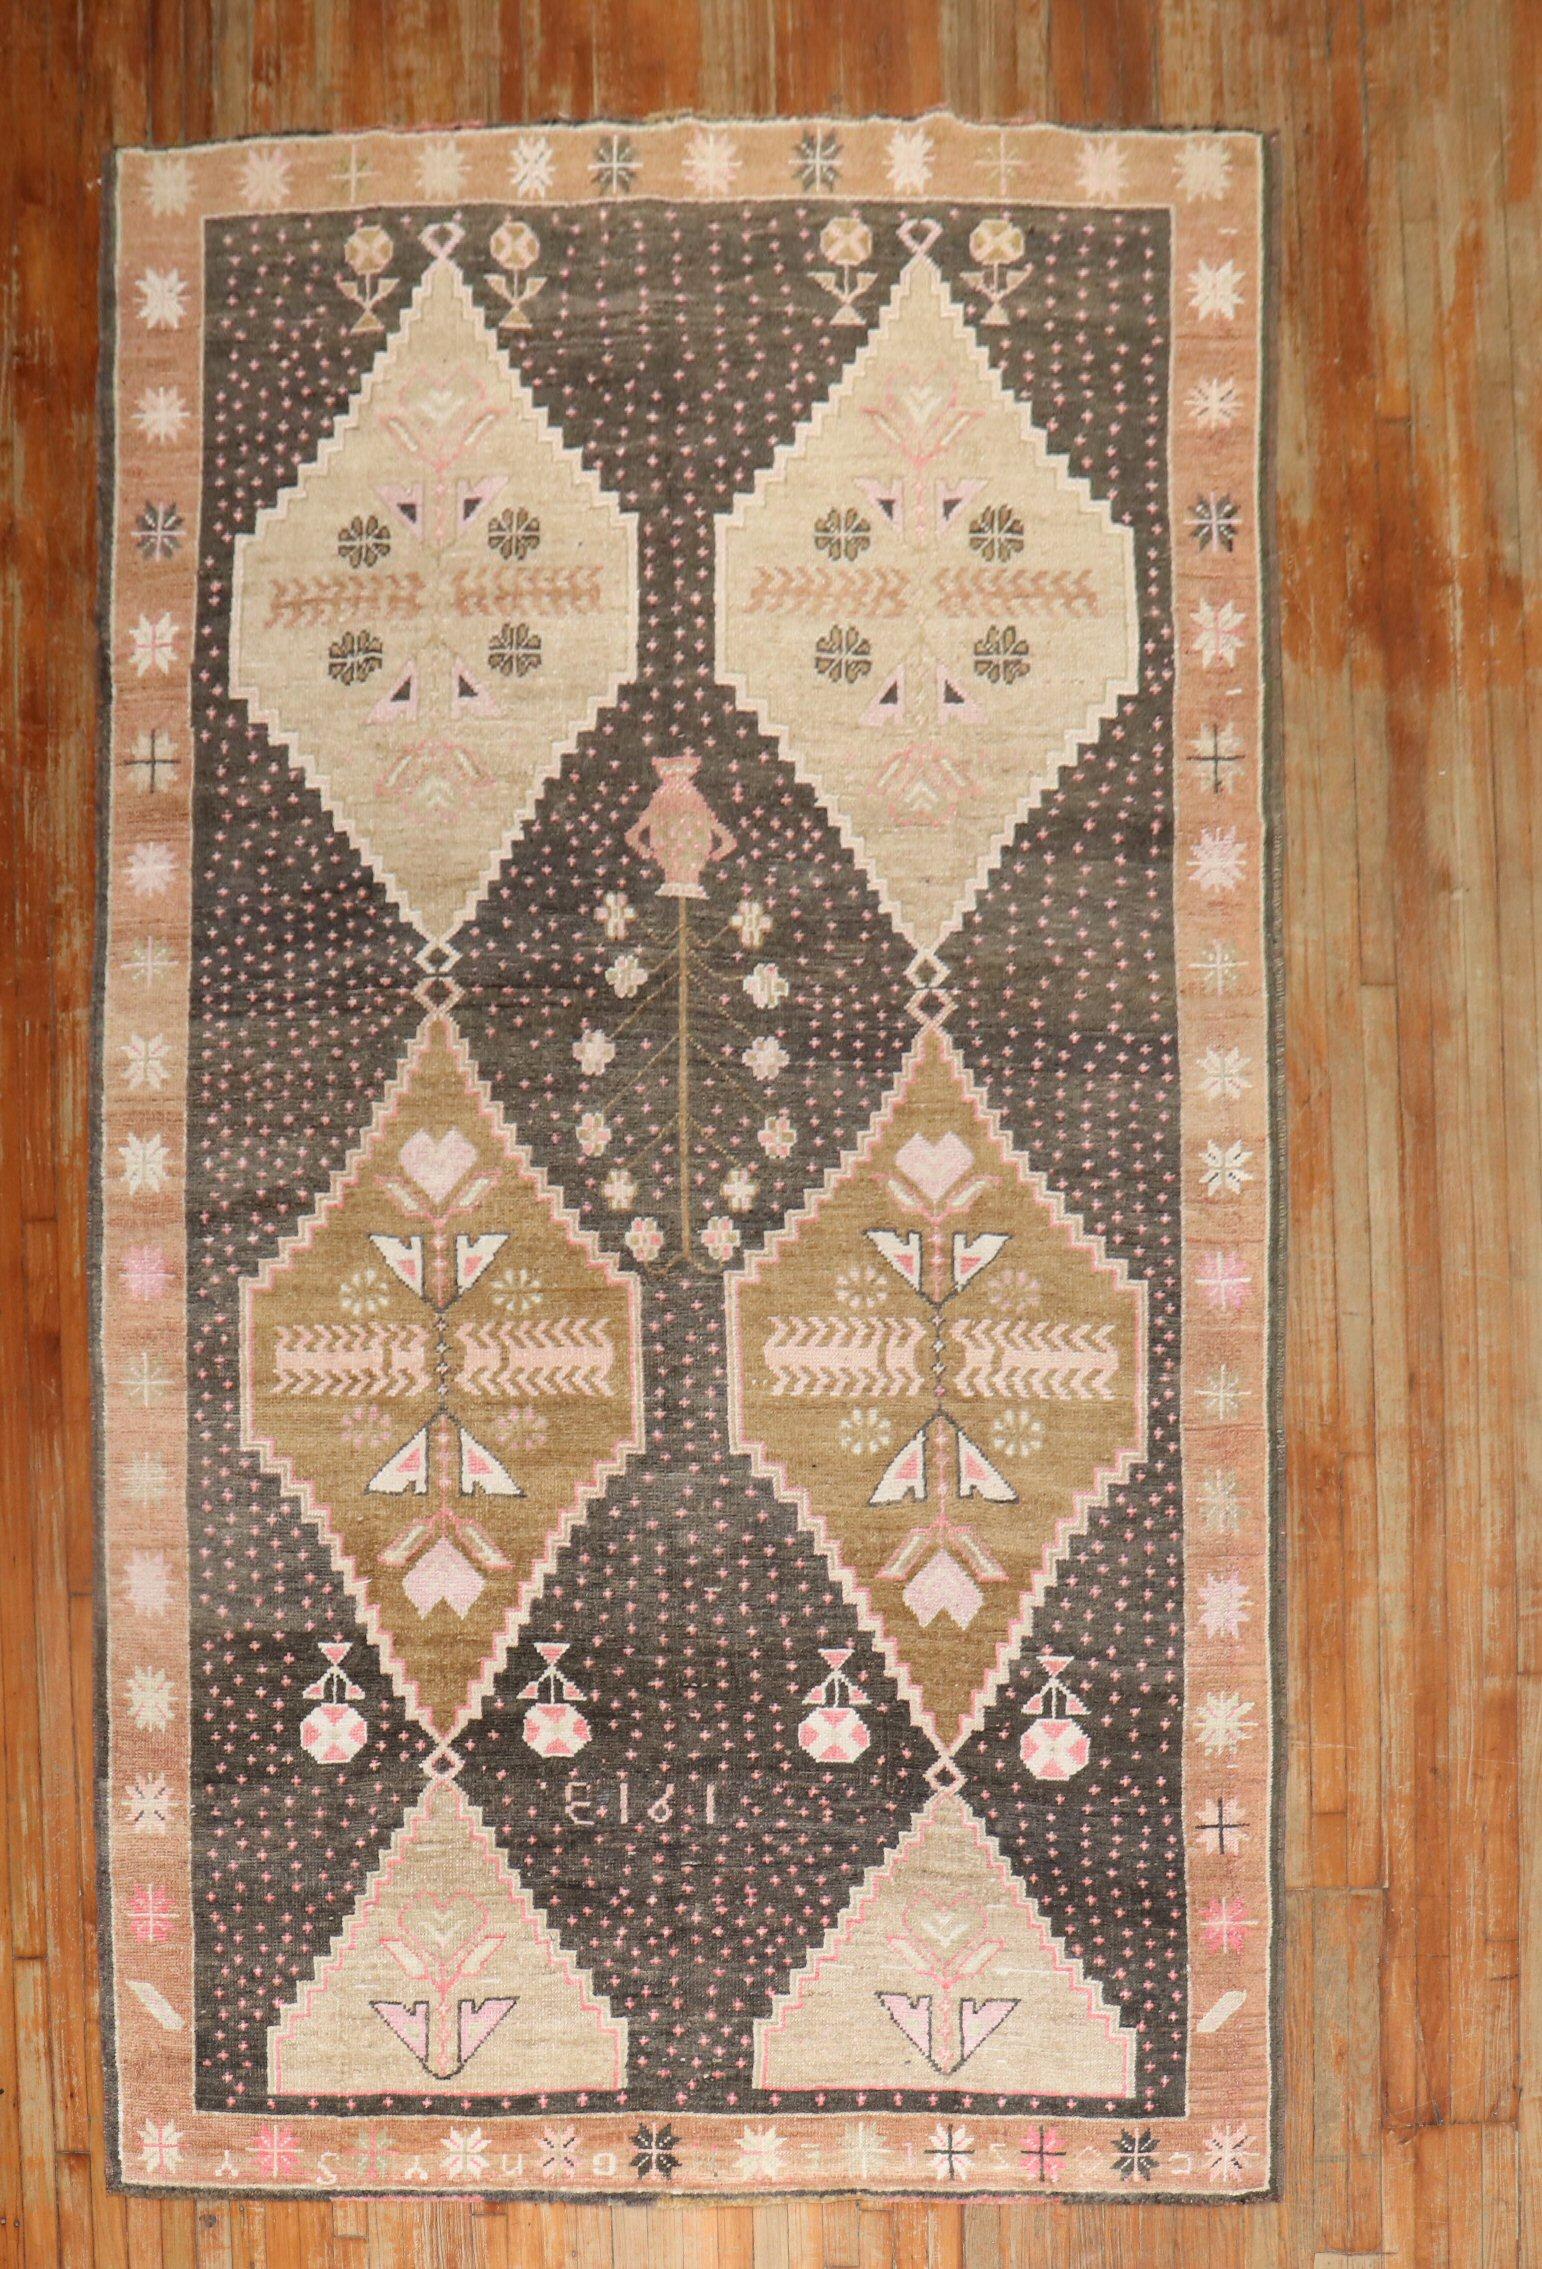 Early 20th century Turkish Gallery size rug with a large-scale geometric design

Measures: 6'4'' x 12'.